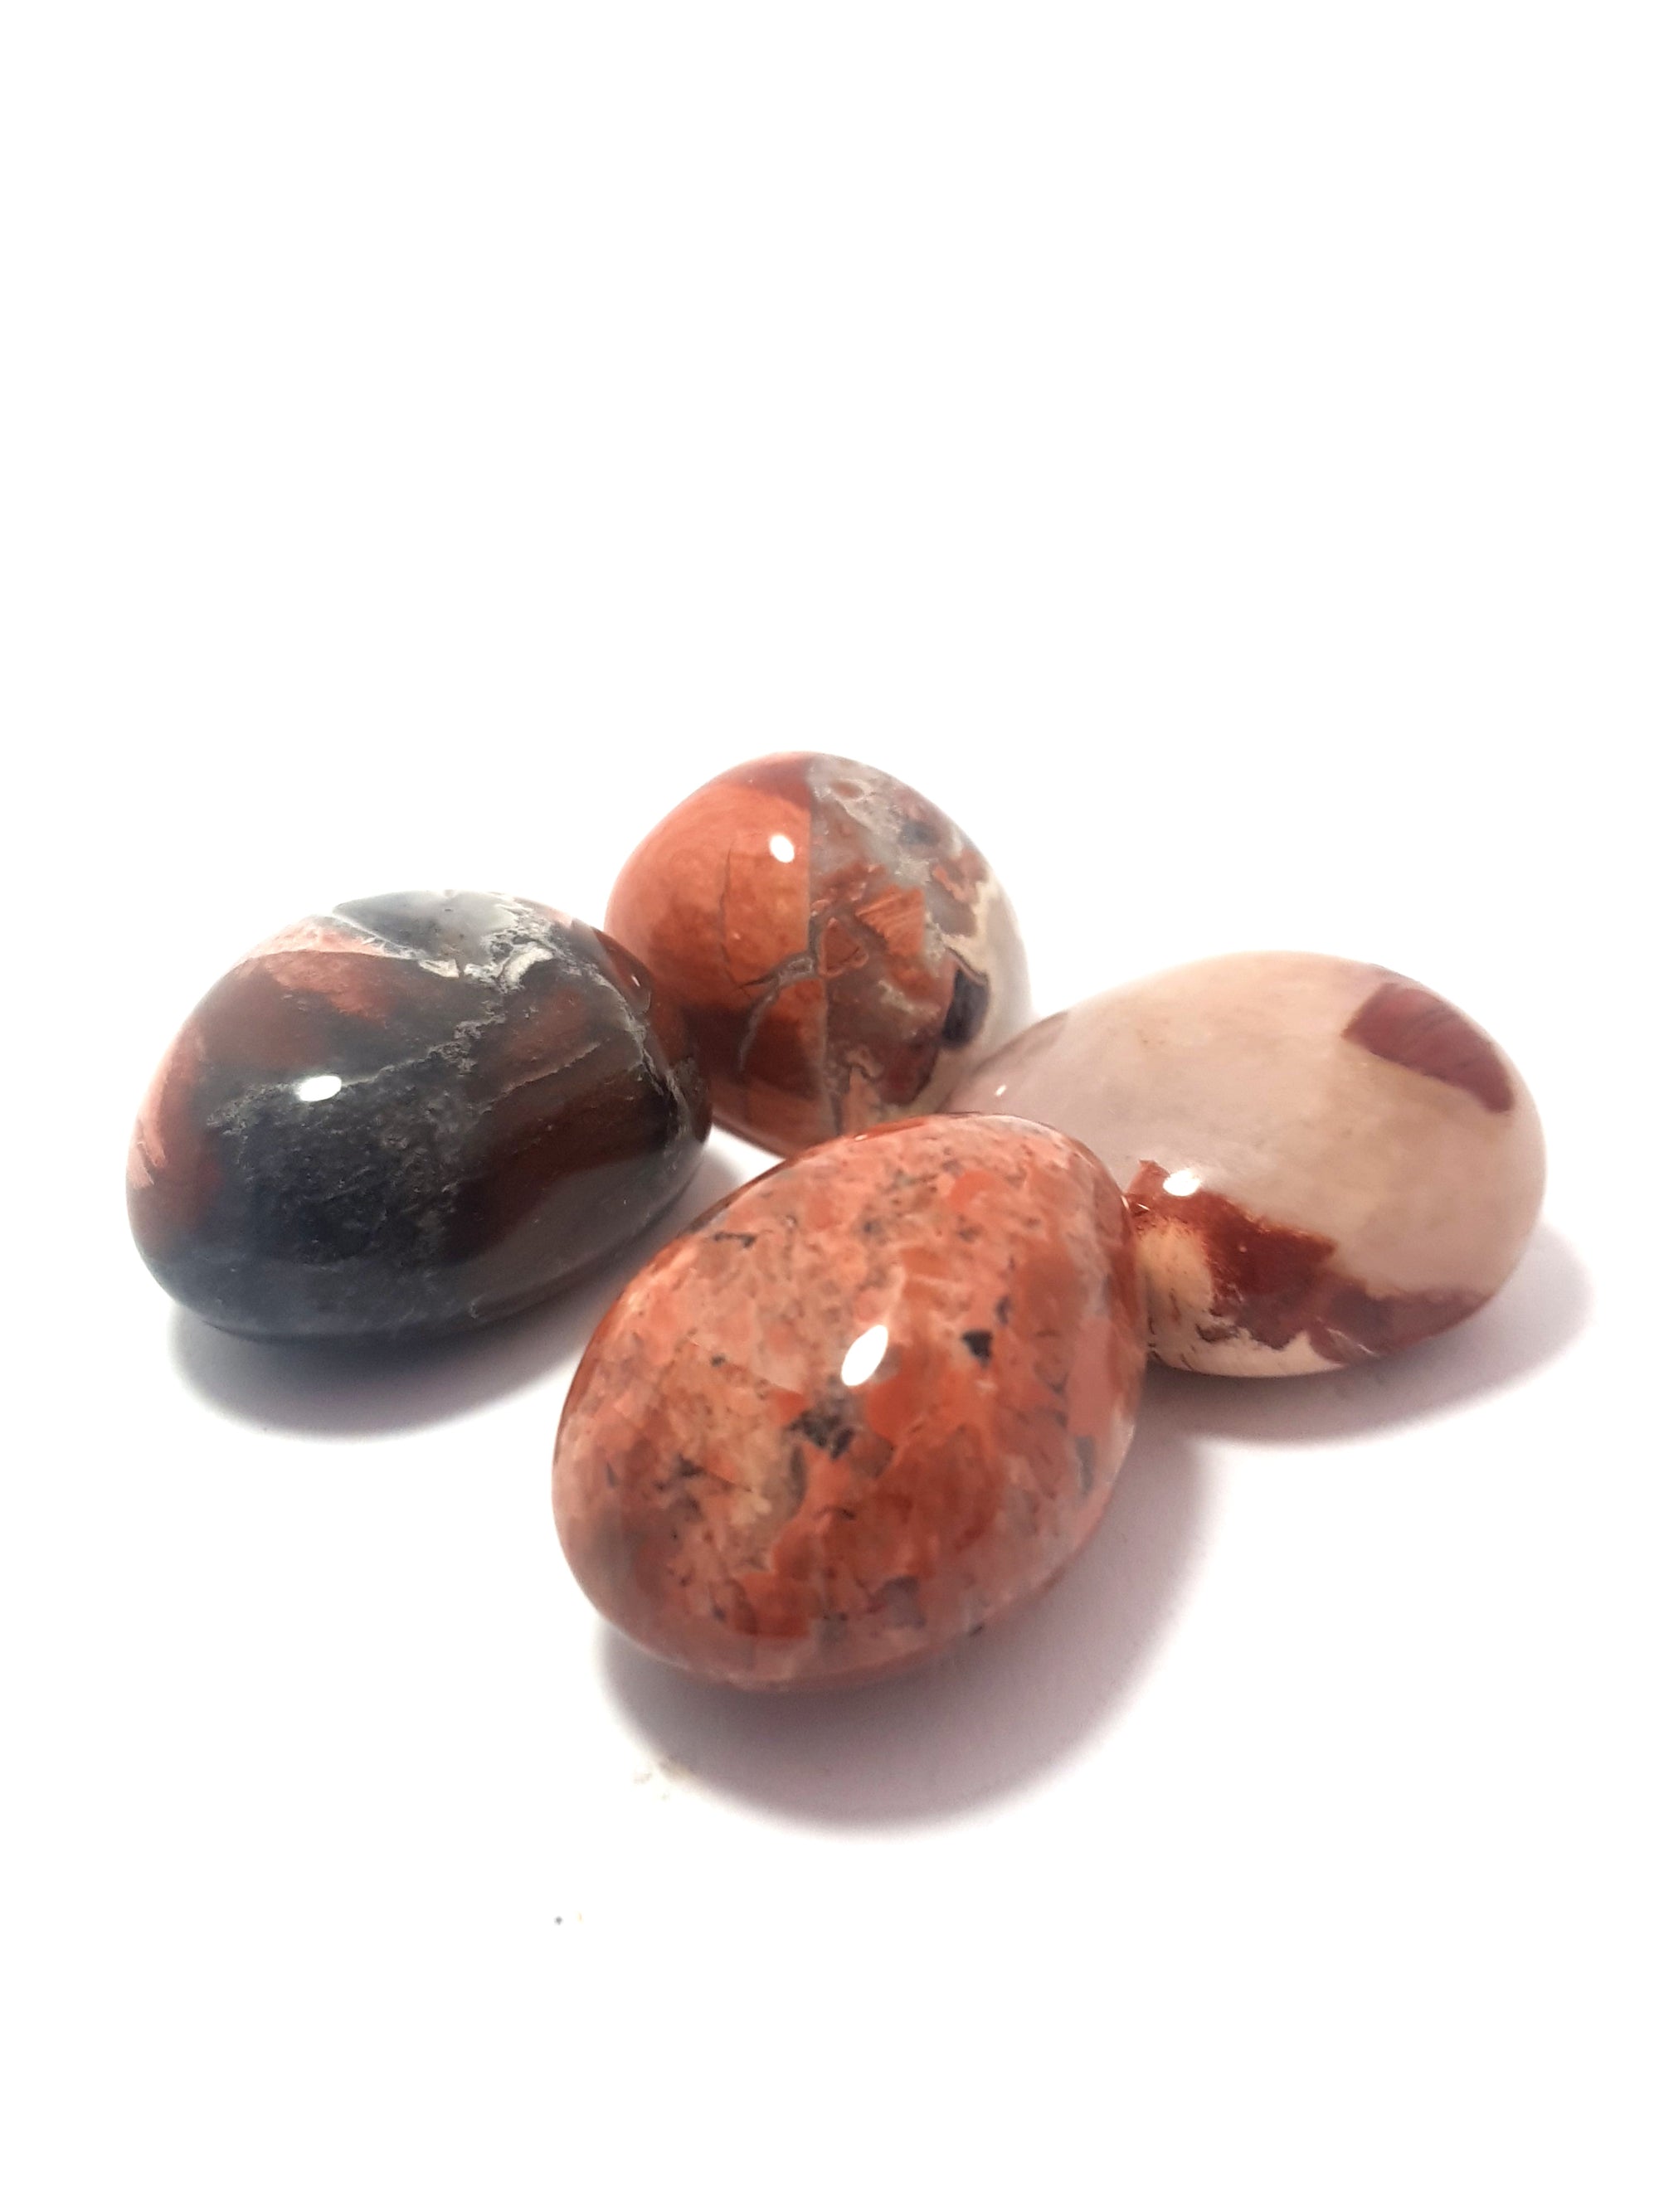 four pieces of breciated Jasper. The samples are not uniform in colour and consist of clearly defined areas which are a dark reddish brown and areas which are tan coloured.